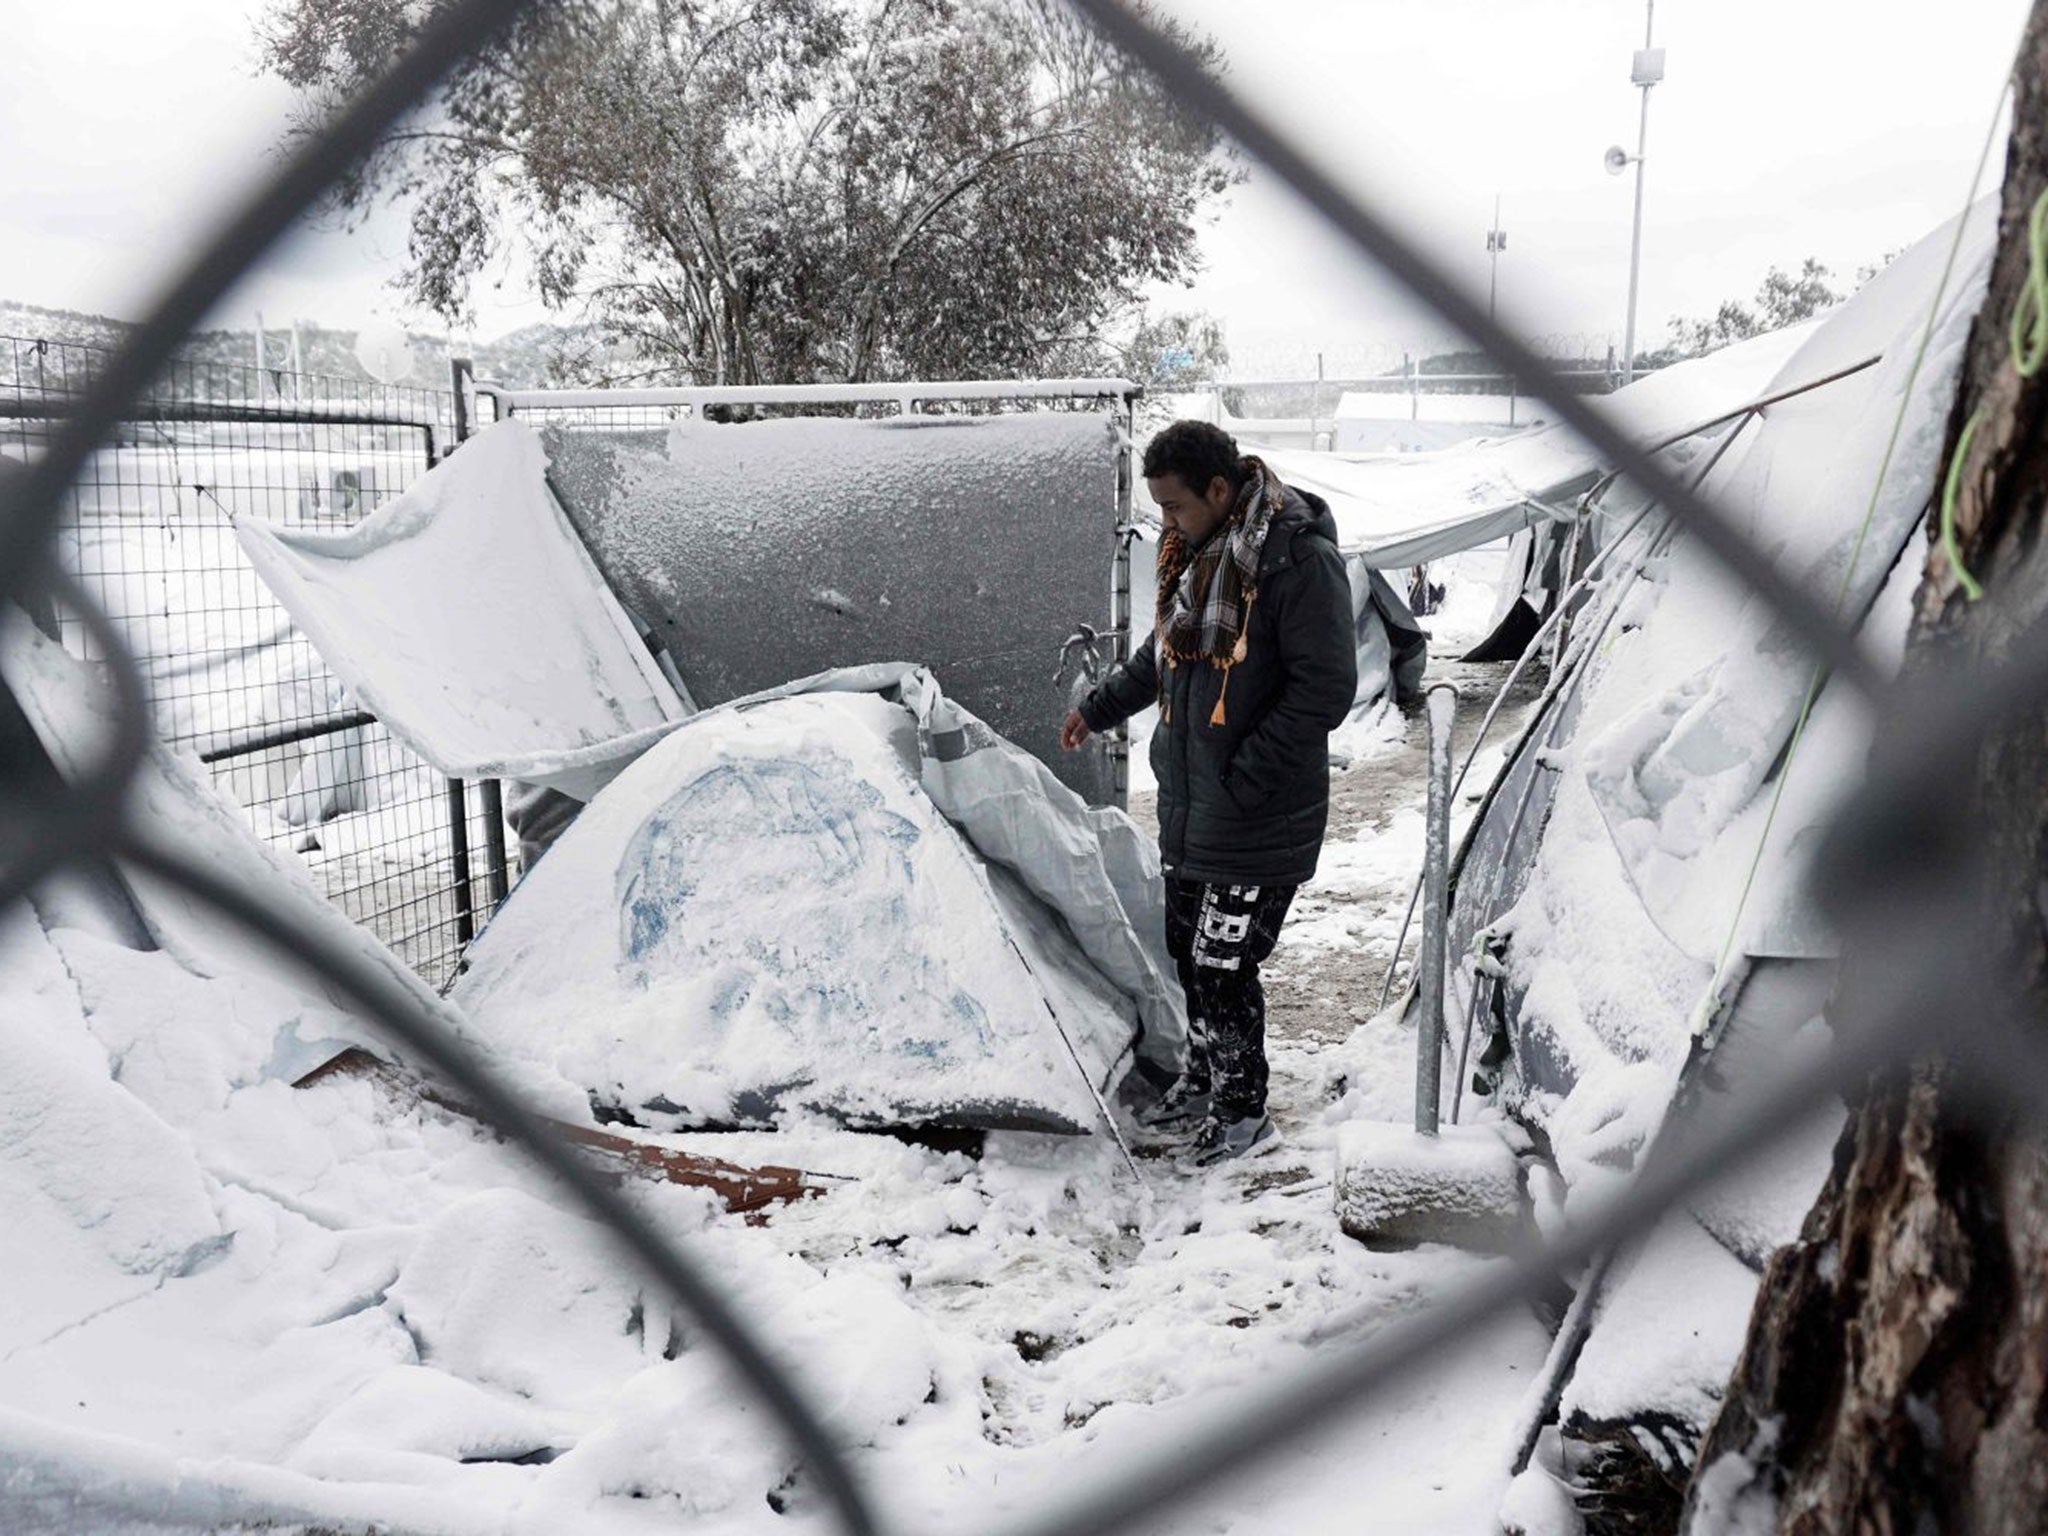 A migrant stands next to a snow-covered tent at the Moria detention camp on the Greek island of Lesbos on 7 January